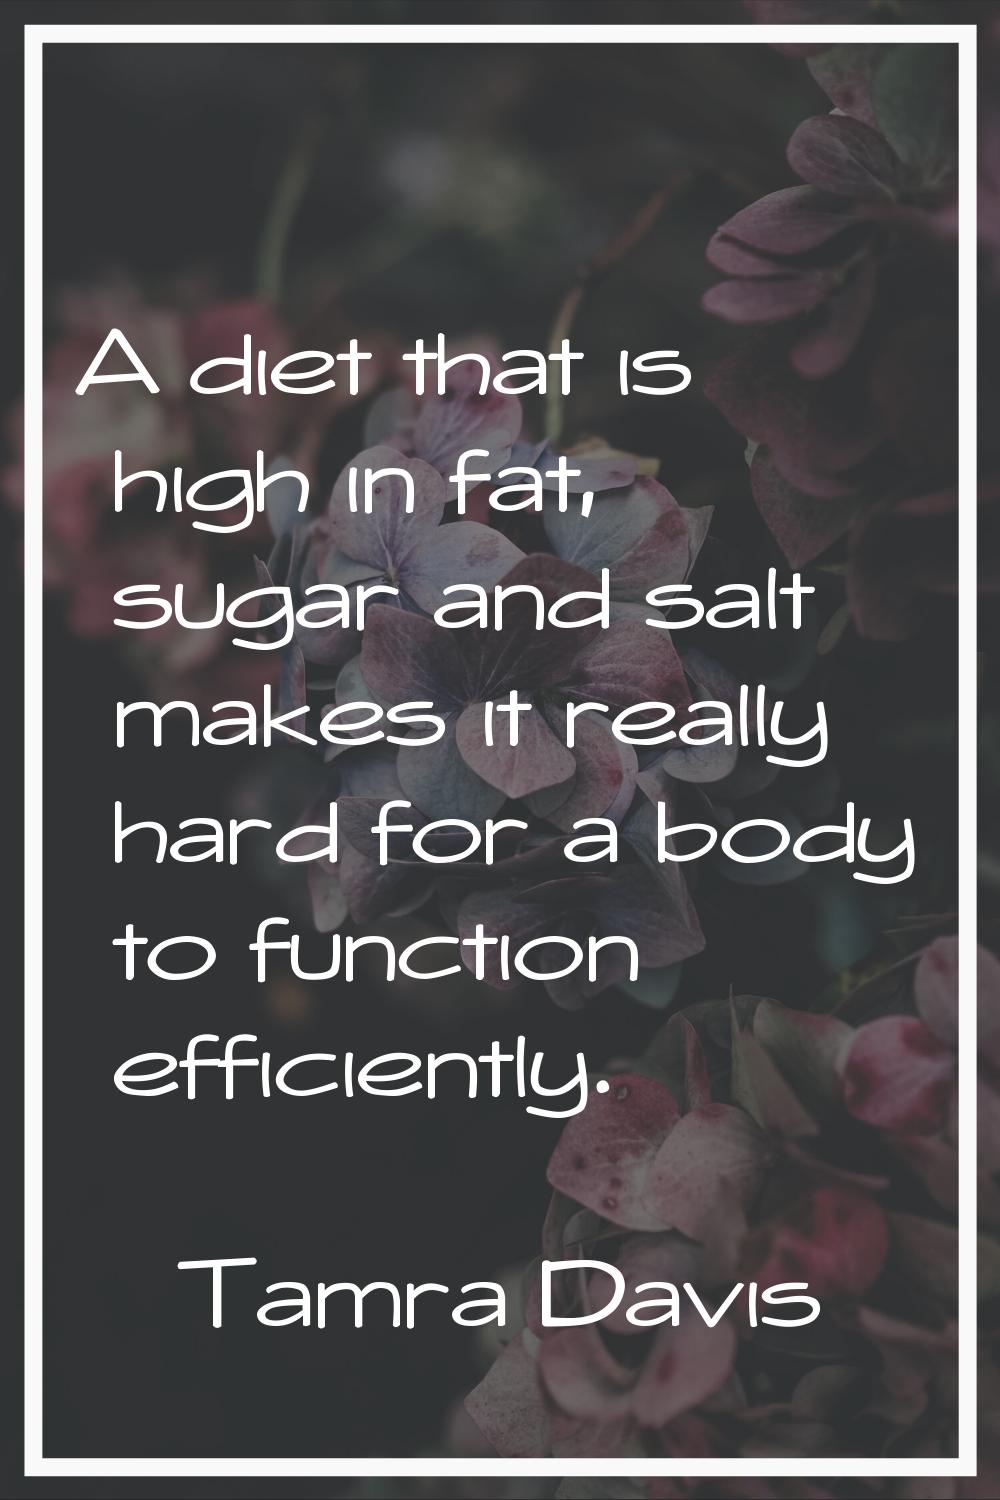 A diet that is high in fat, sugar and salt makes it really hard for a body to function efficiently.